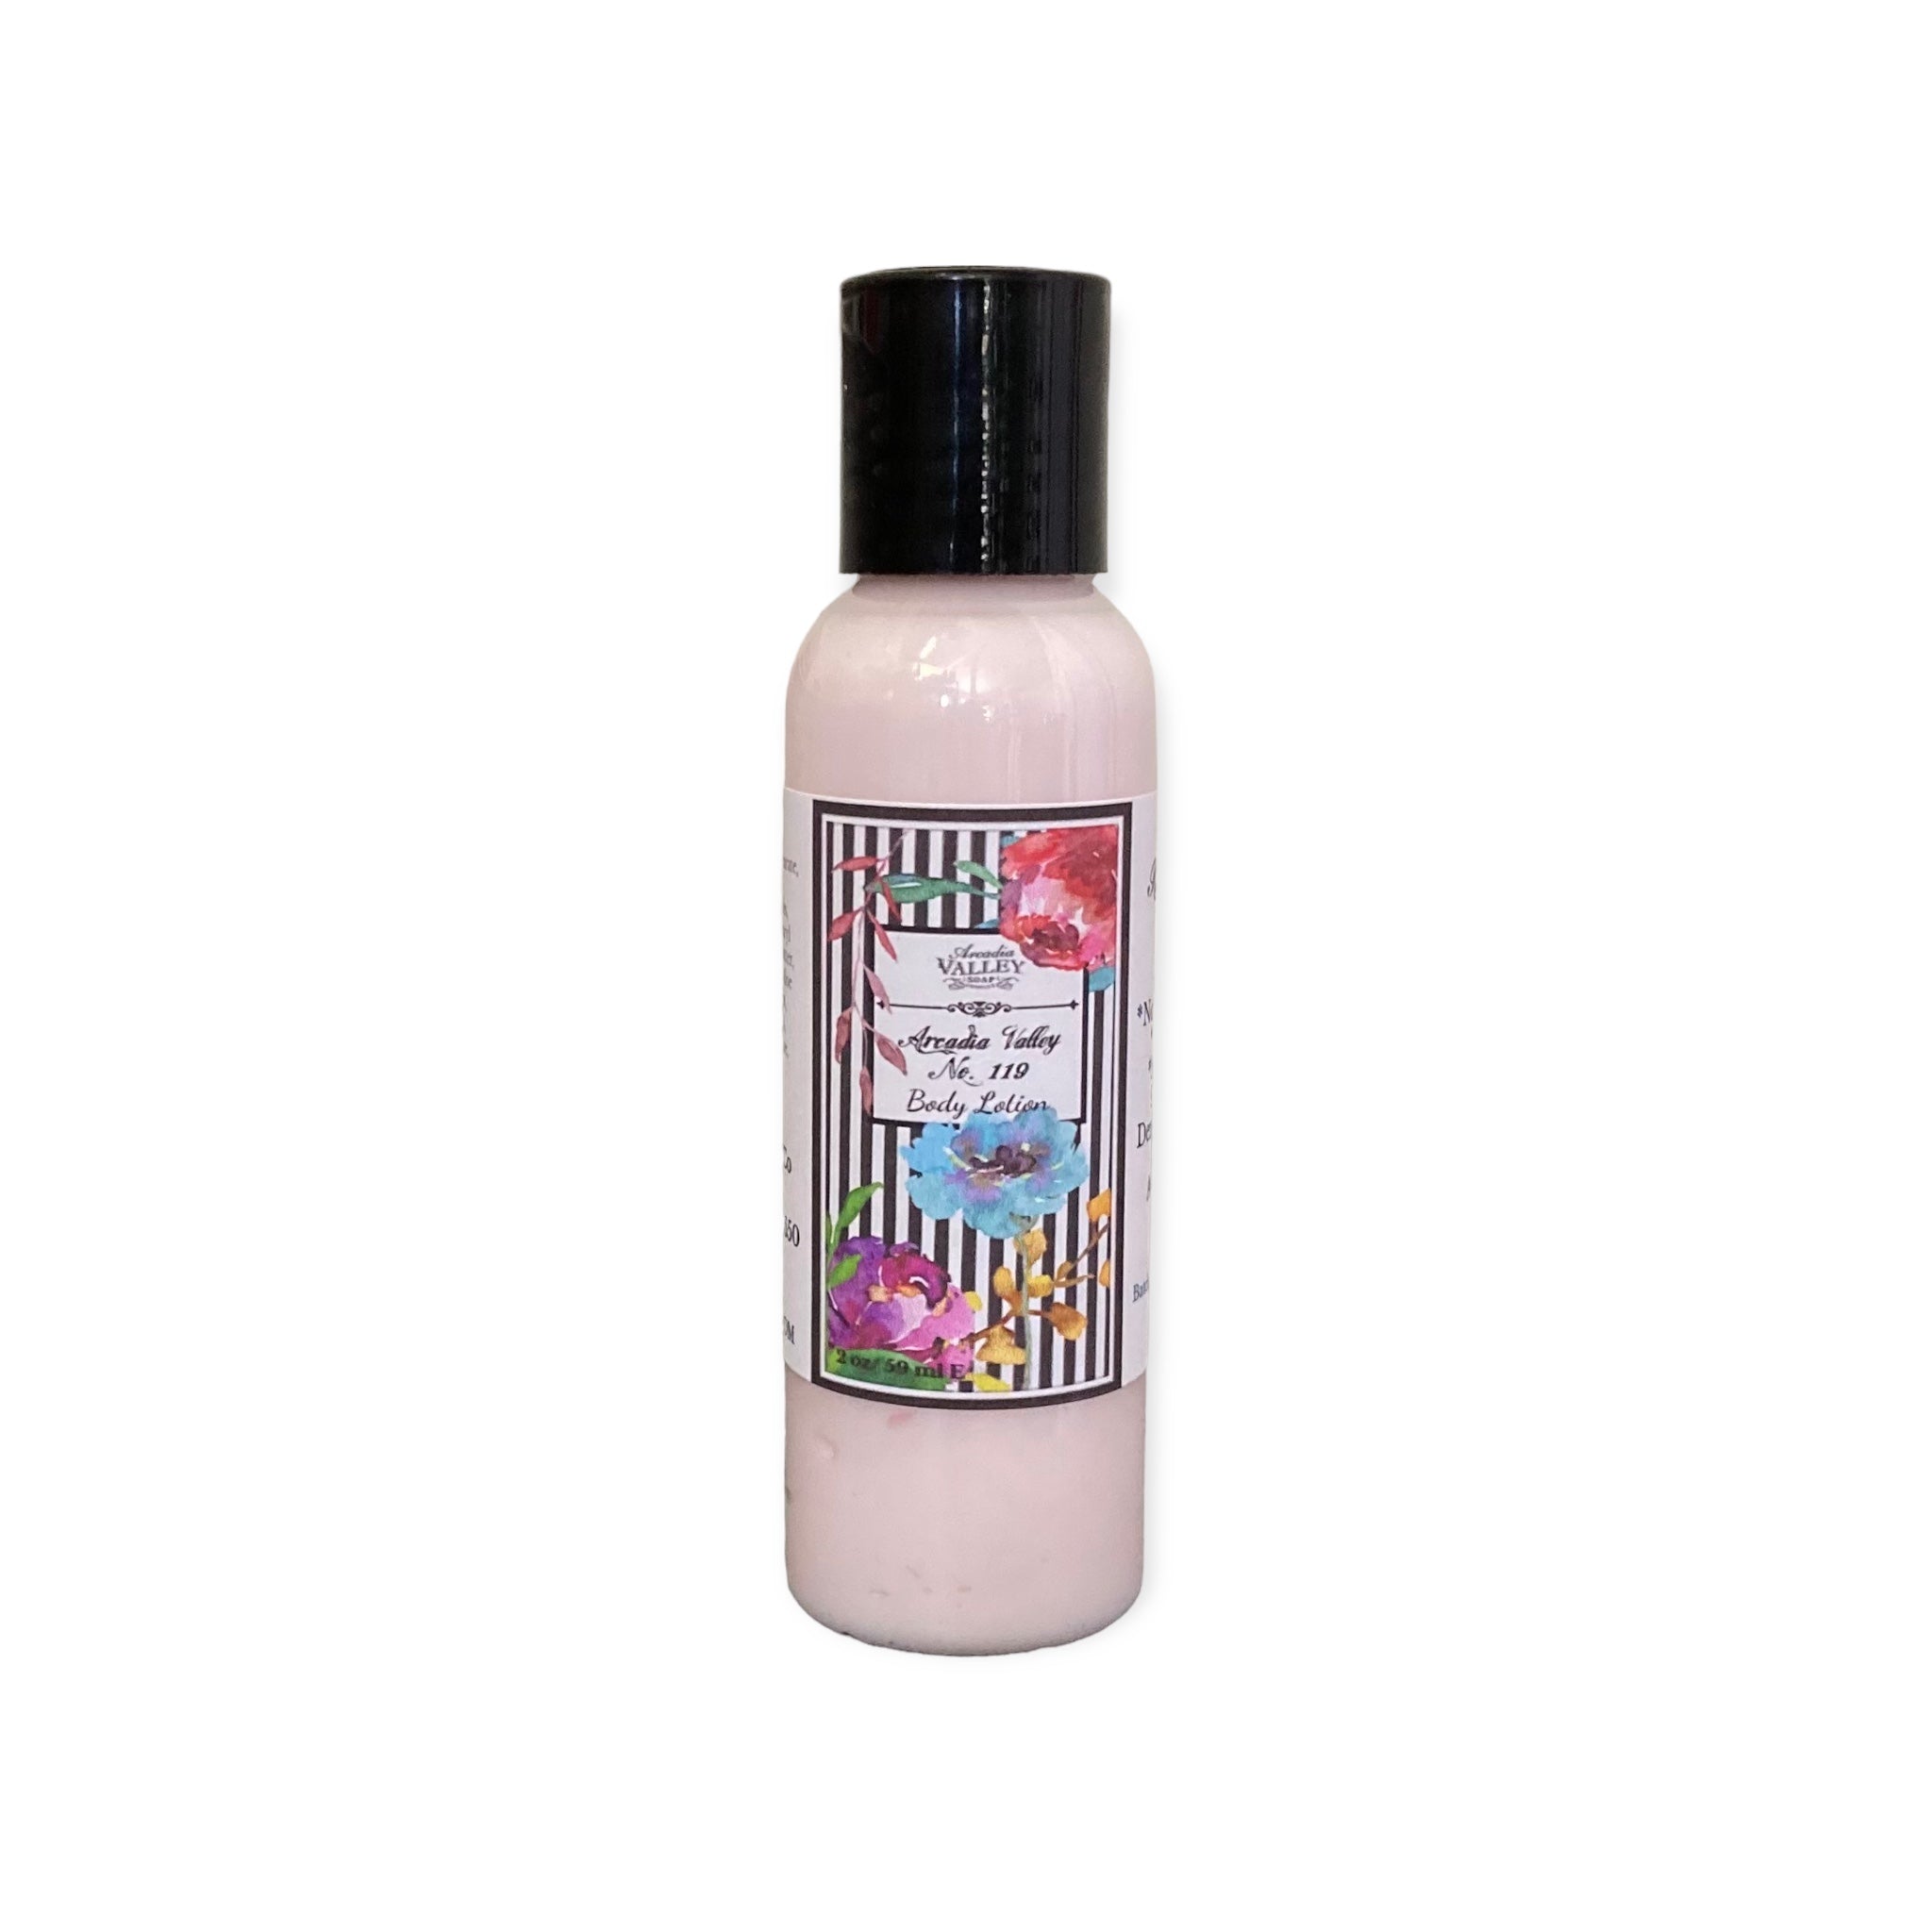 Pink lotion in 2 ounce plastic cap bottle with AVS119 scented lotion